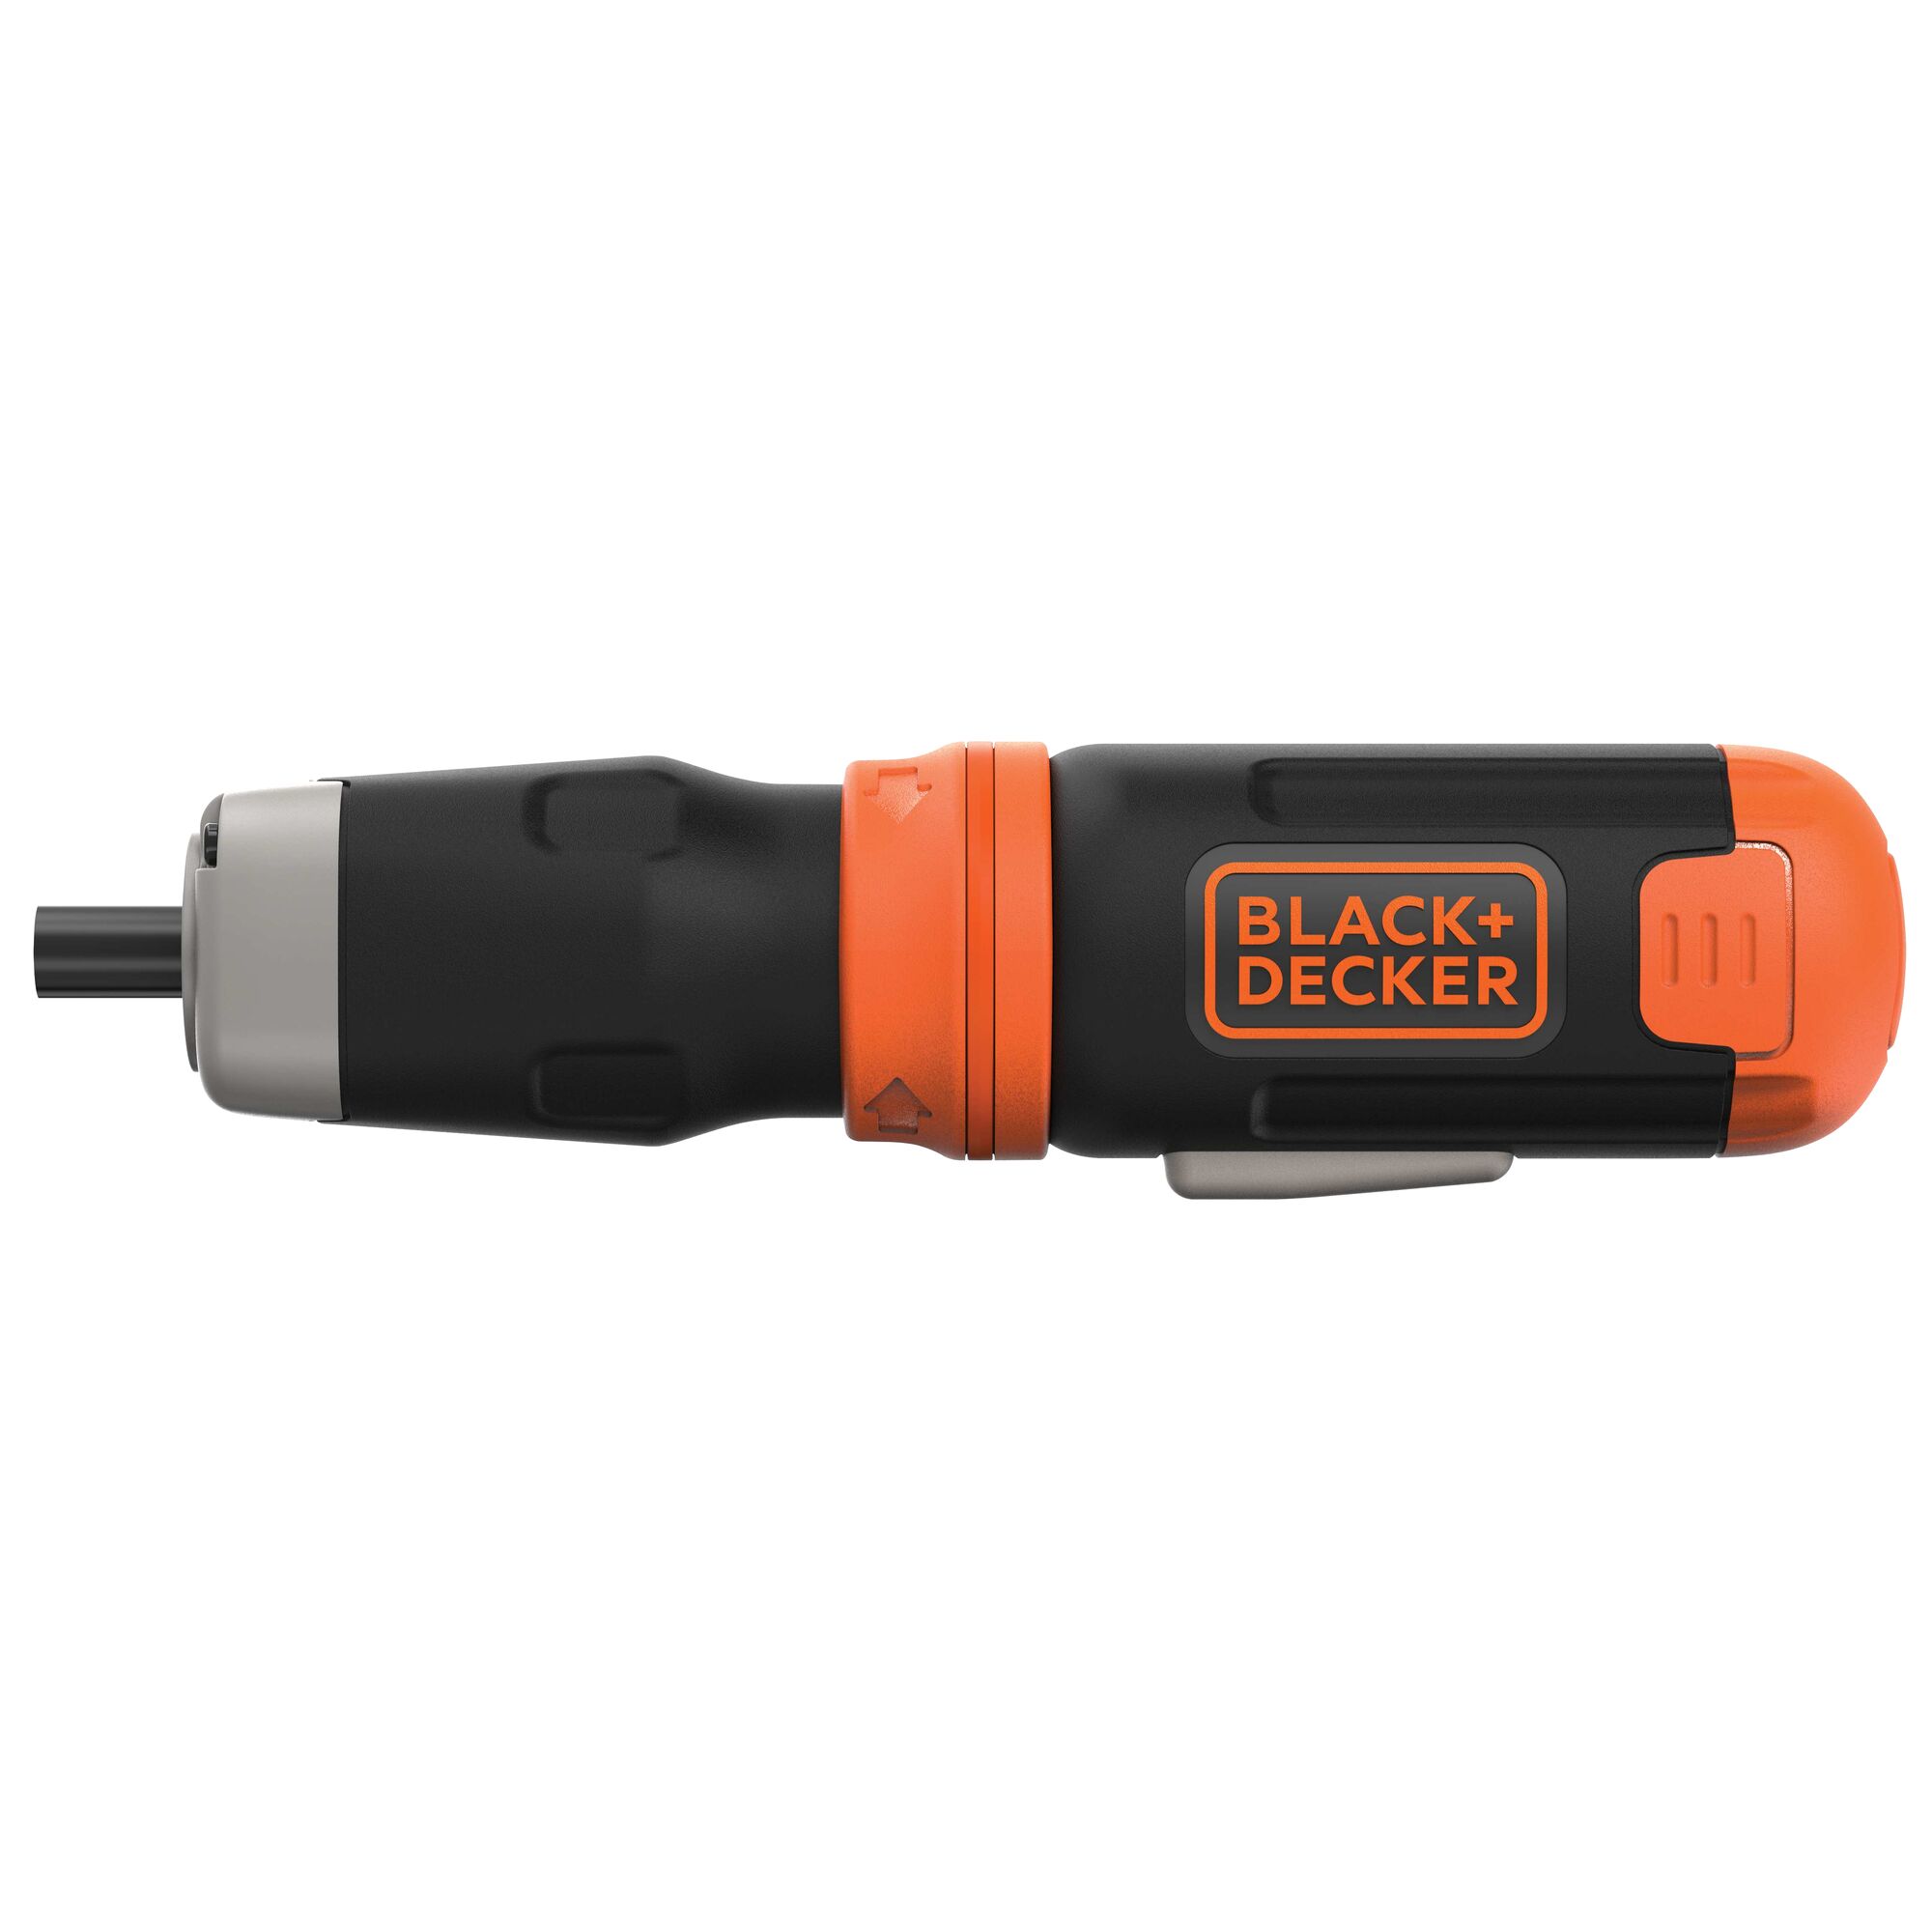 Profile of cordless power driver screwdriver.